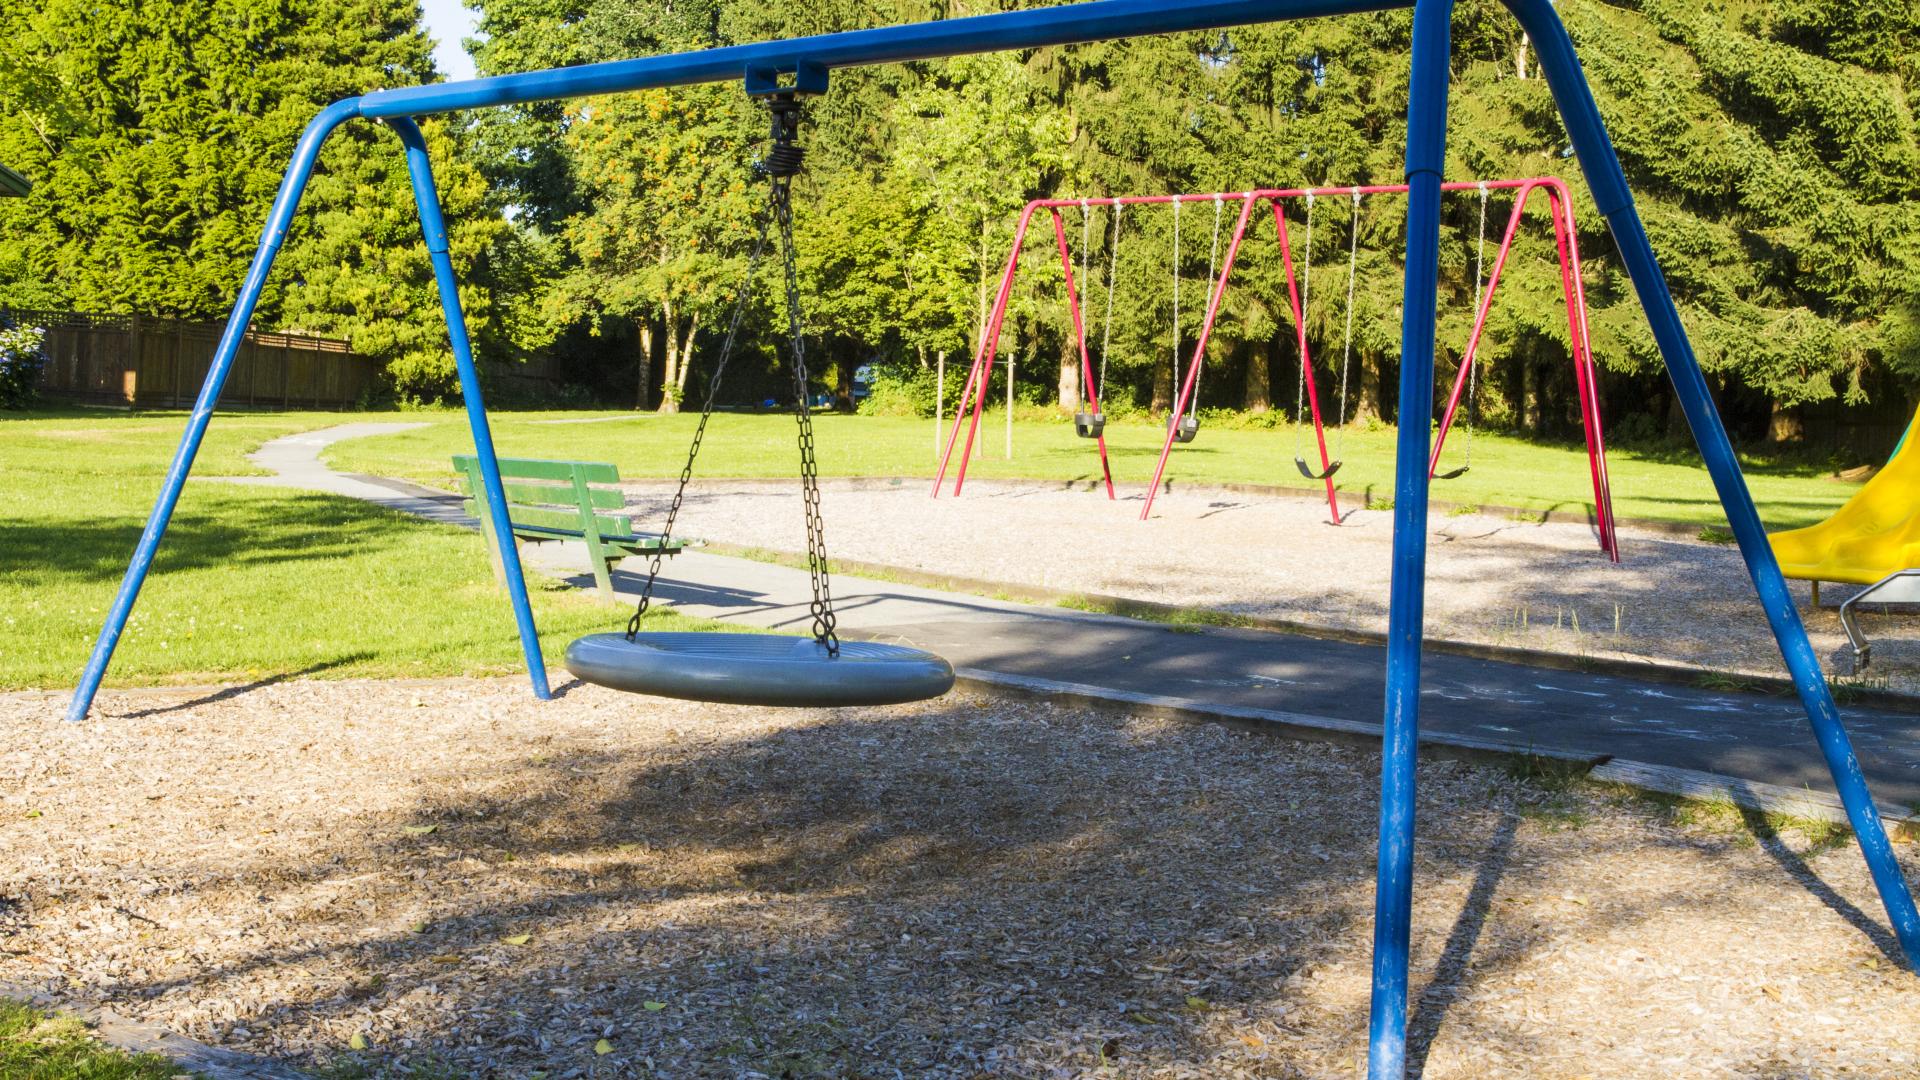 A set of swing sets, one have a large round disc to swing on.